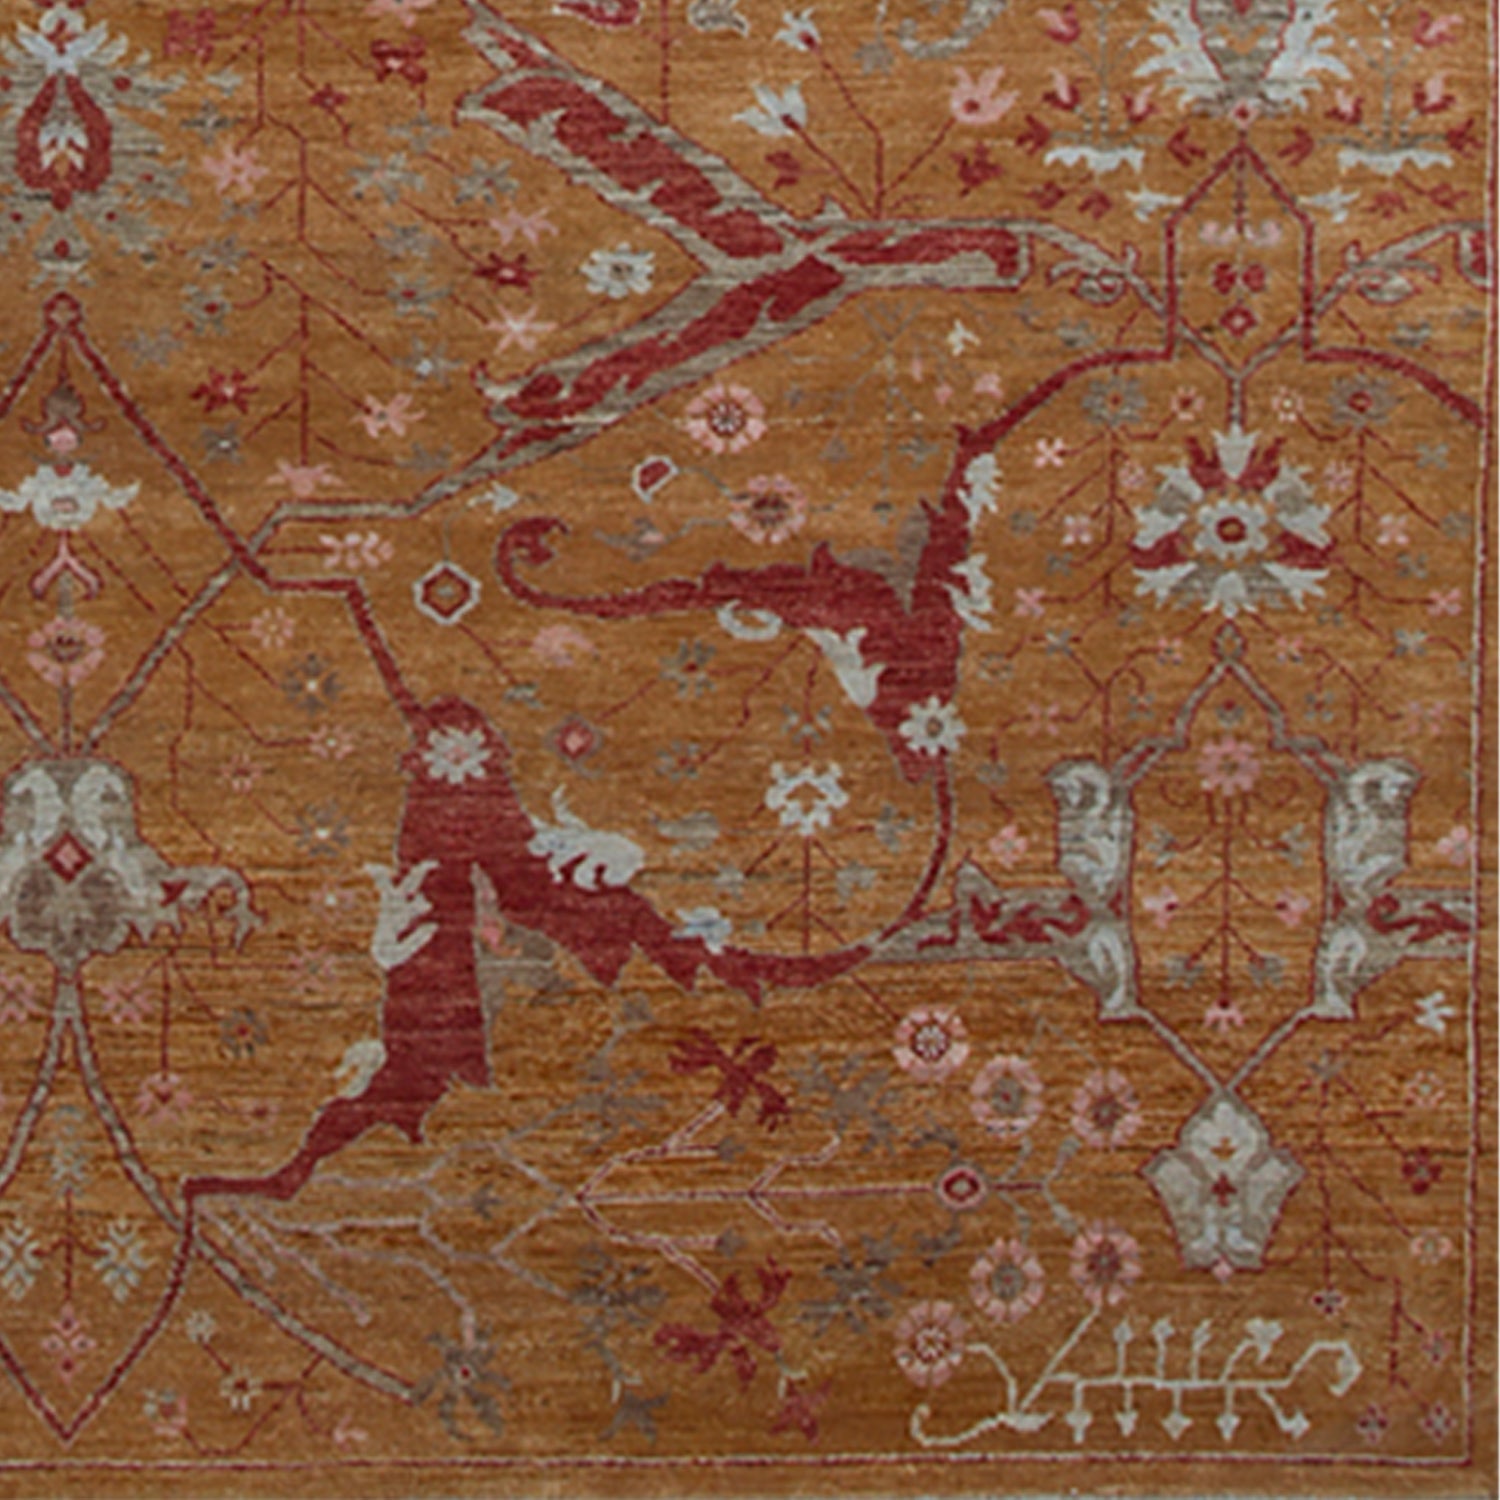 Woven rug swatch in a dense floral print in shades of red, pink and blue-gray on an orange field.